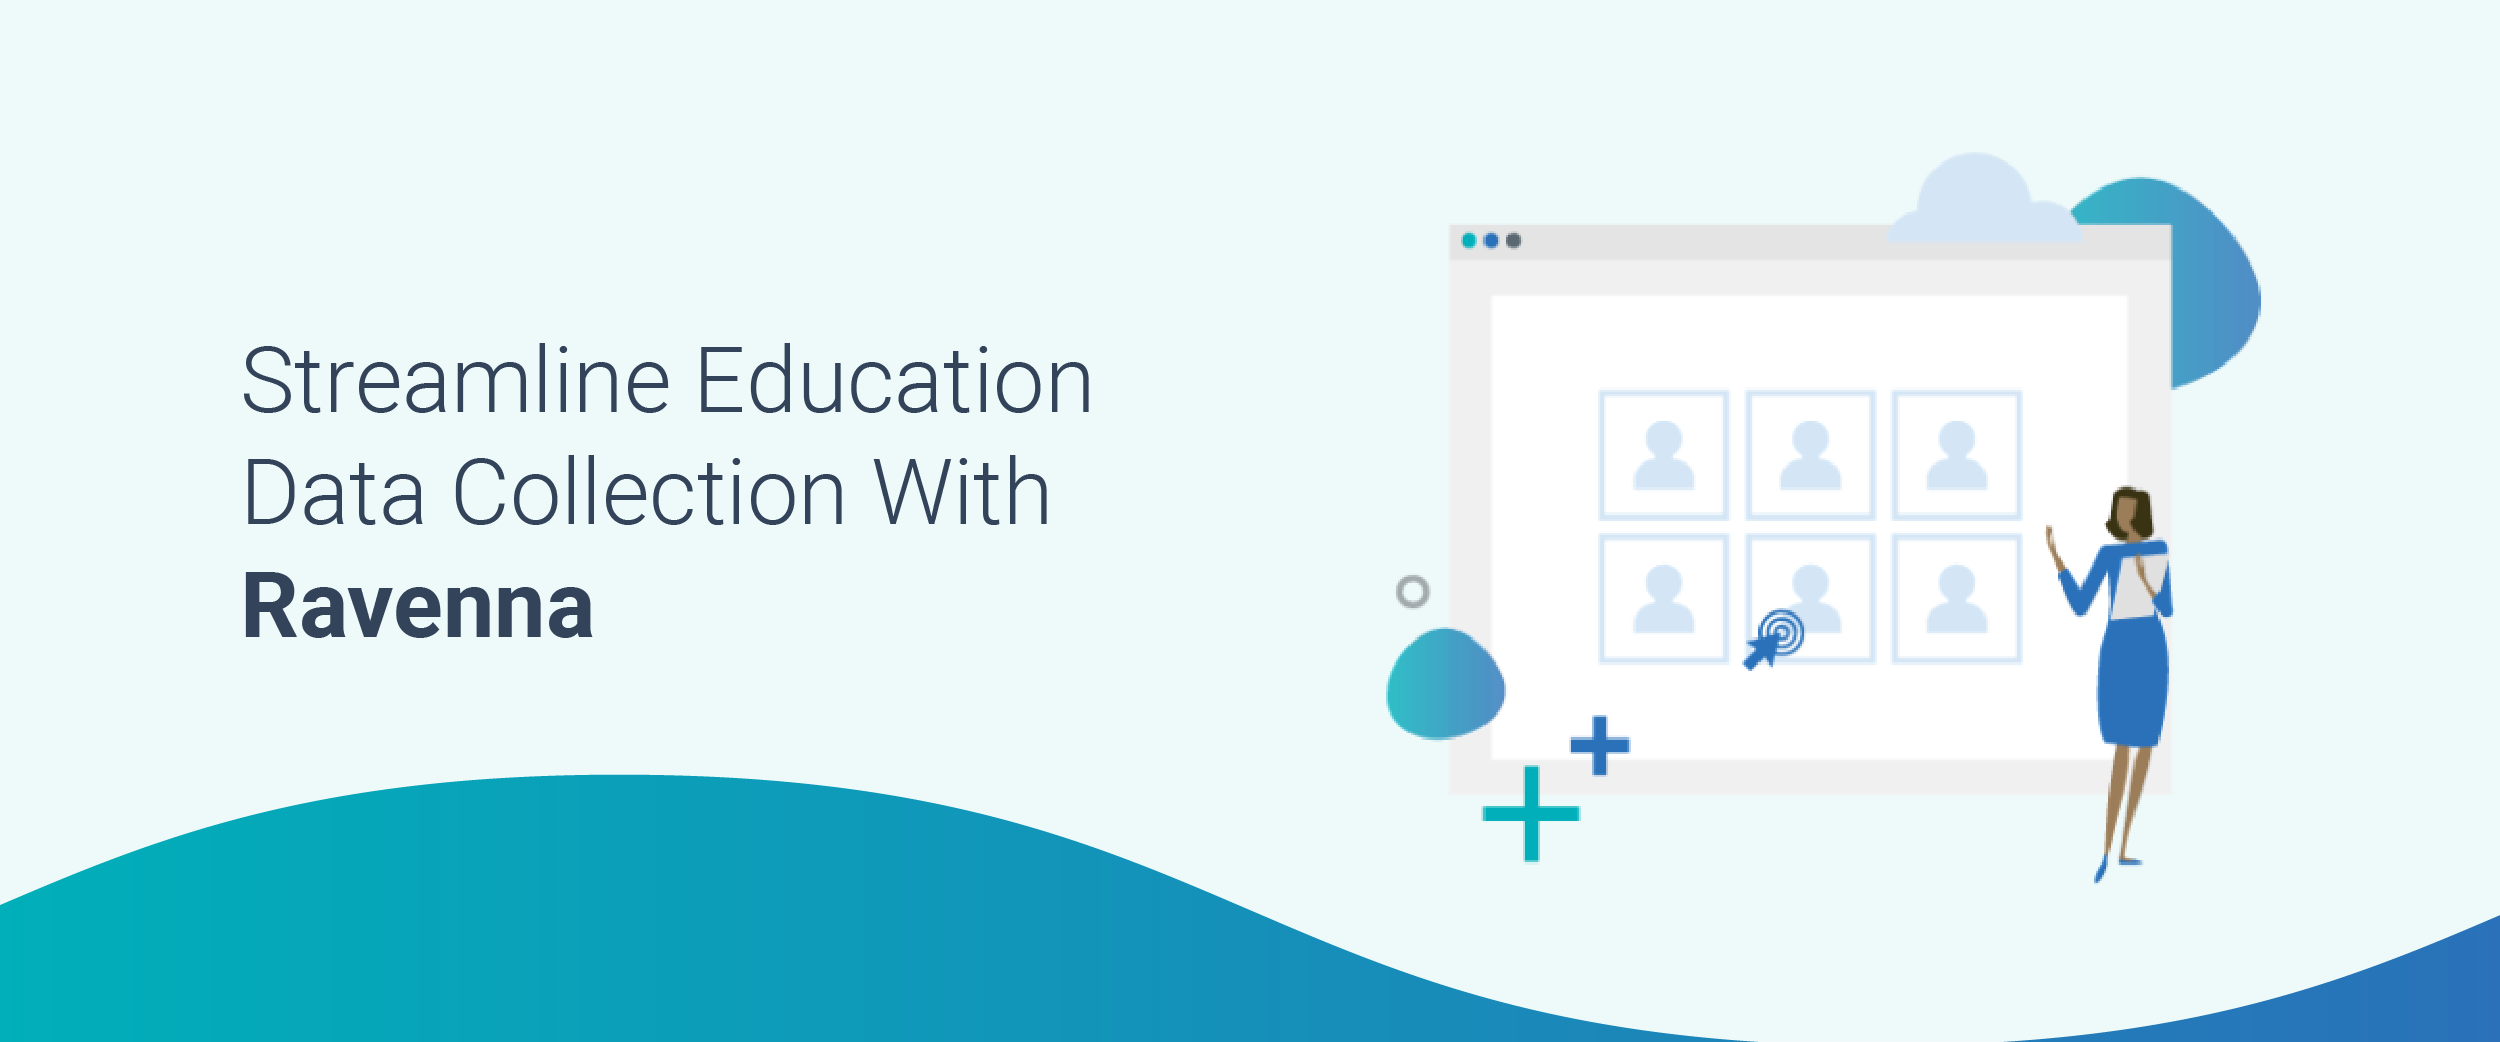 Streamline Education Data Collection With Ravenna